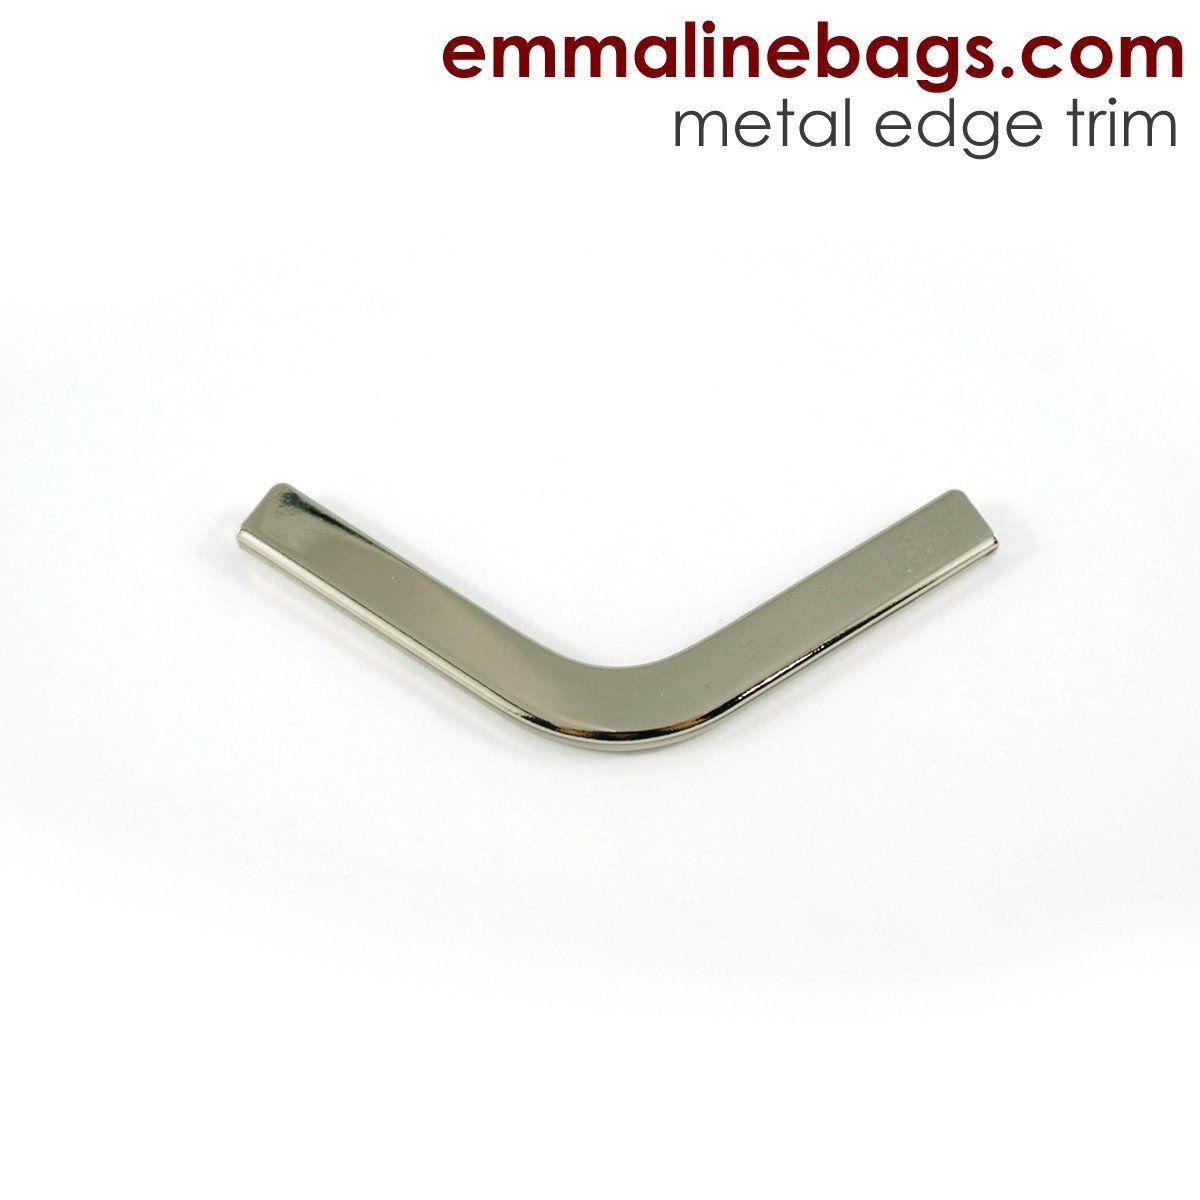 Pointed C Logo - Metal Edge Trim: Style C - Small Pointed - in Nickel Finish ...